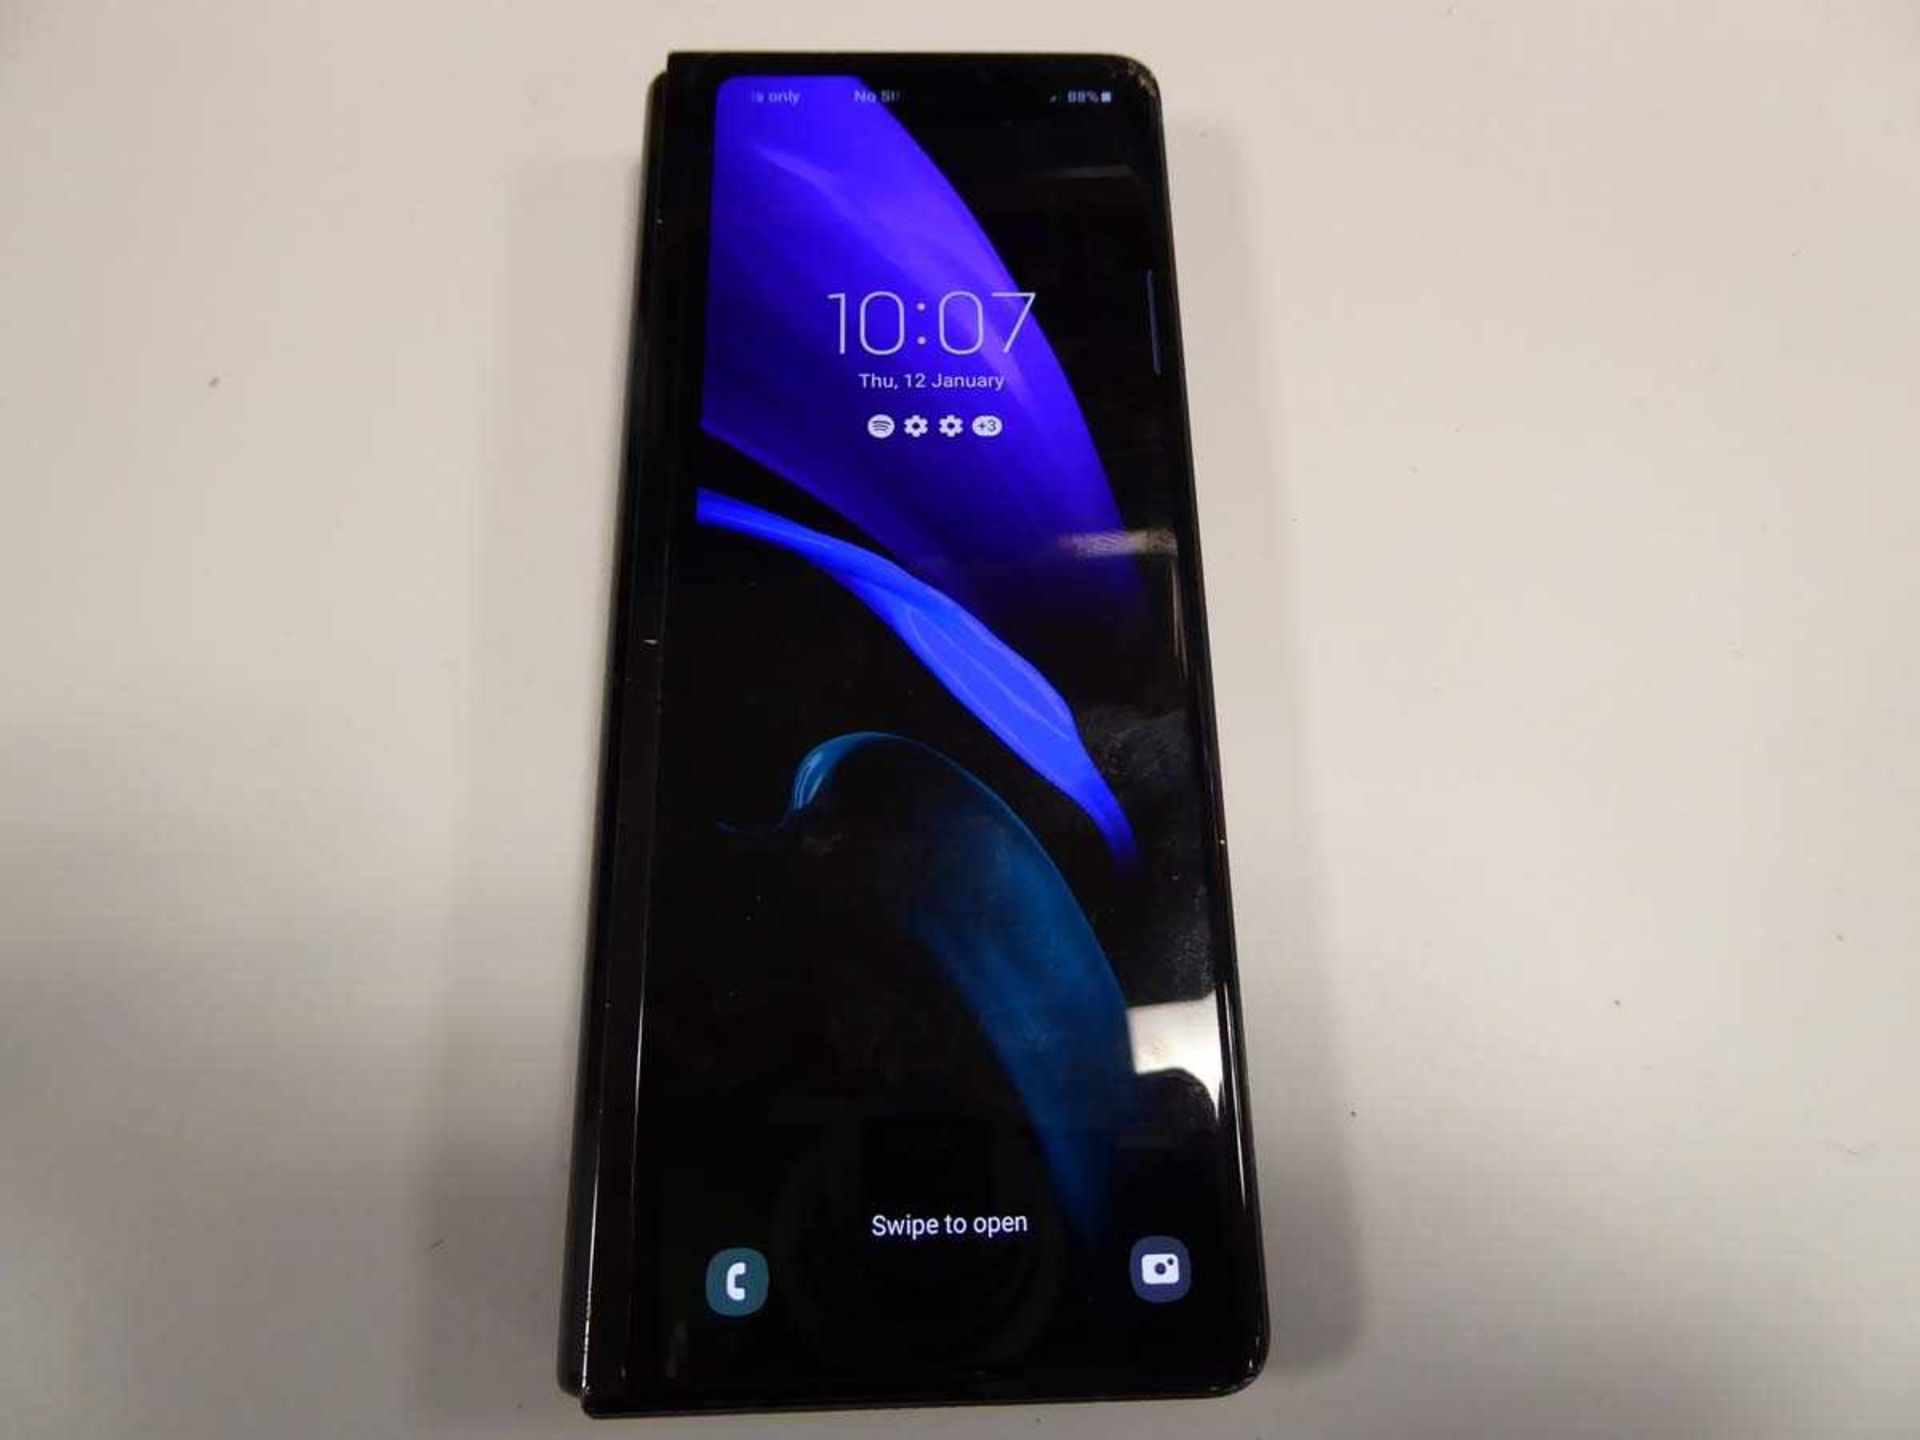 Samsung Galaxy Z Fold 2 5G mobile phone - Image 2 of 3